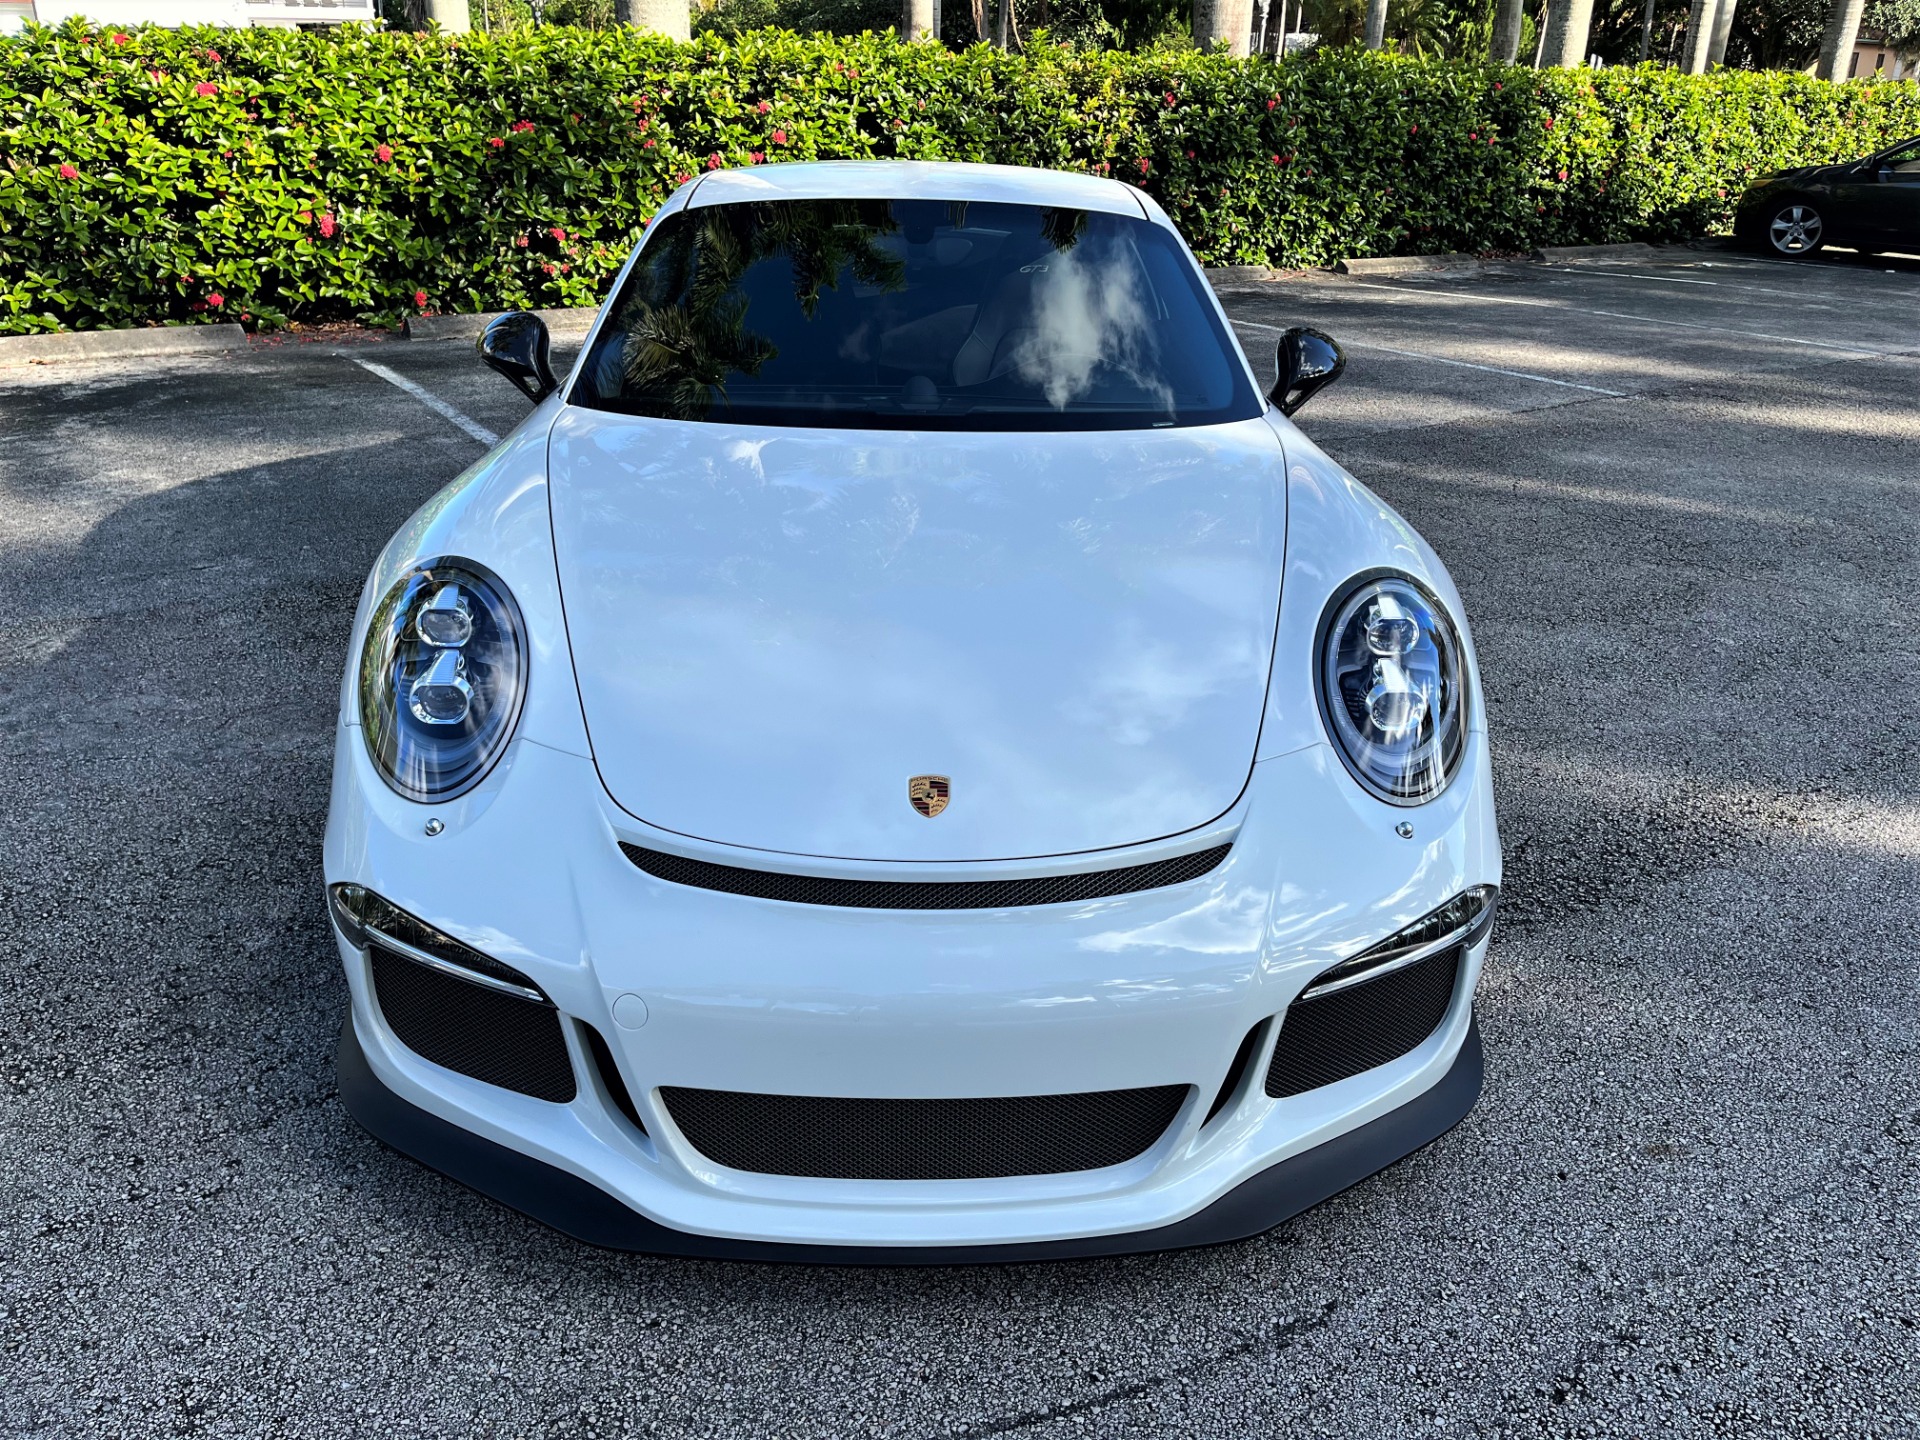 Used 2014 Porsche 911 GT3 for sale Sold at The Gables Sports Cars in Miami FL 33146 3